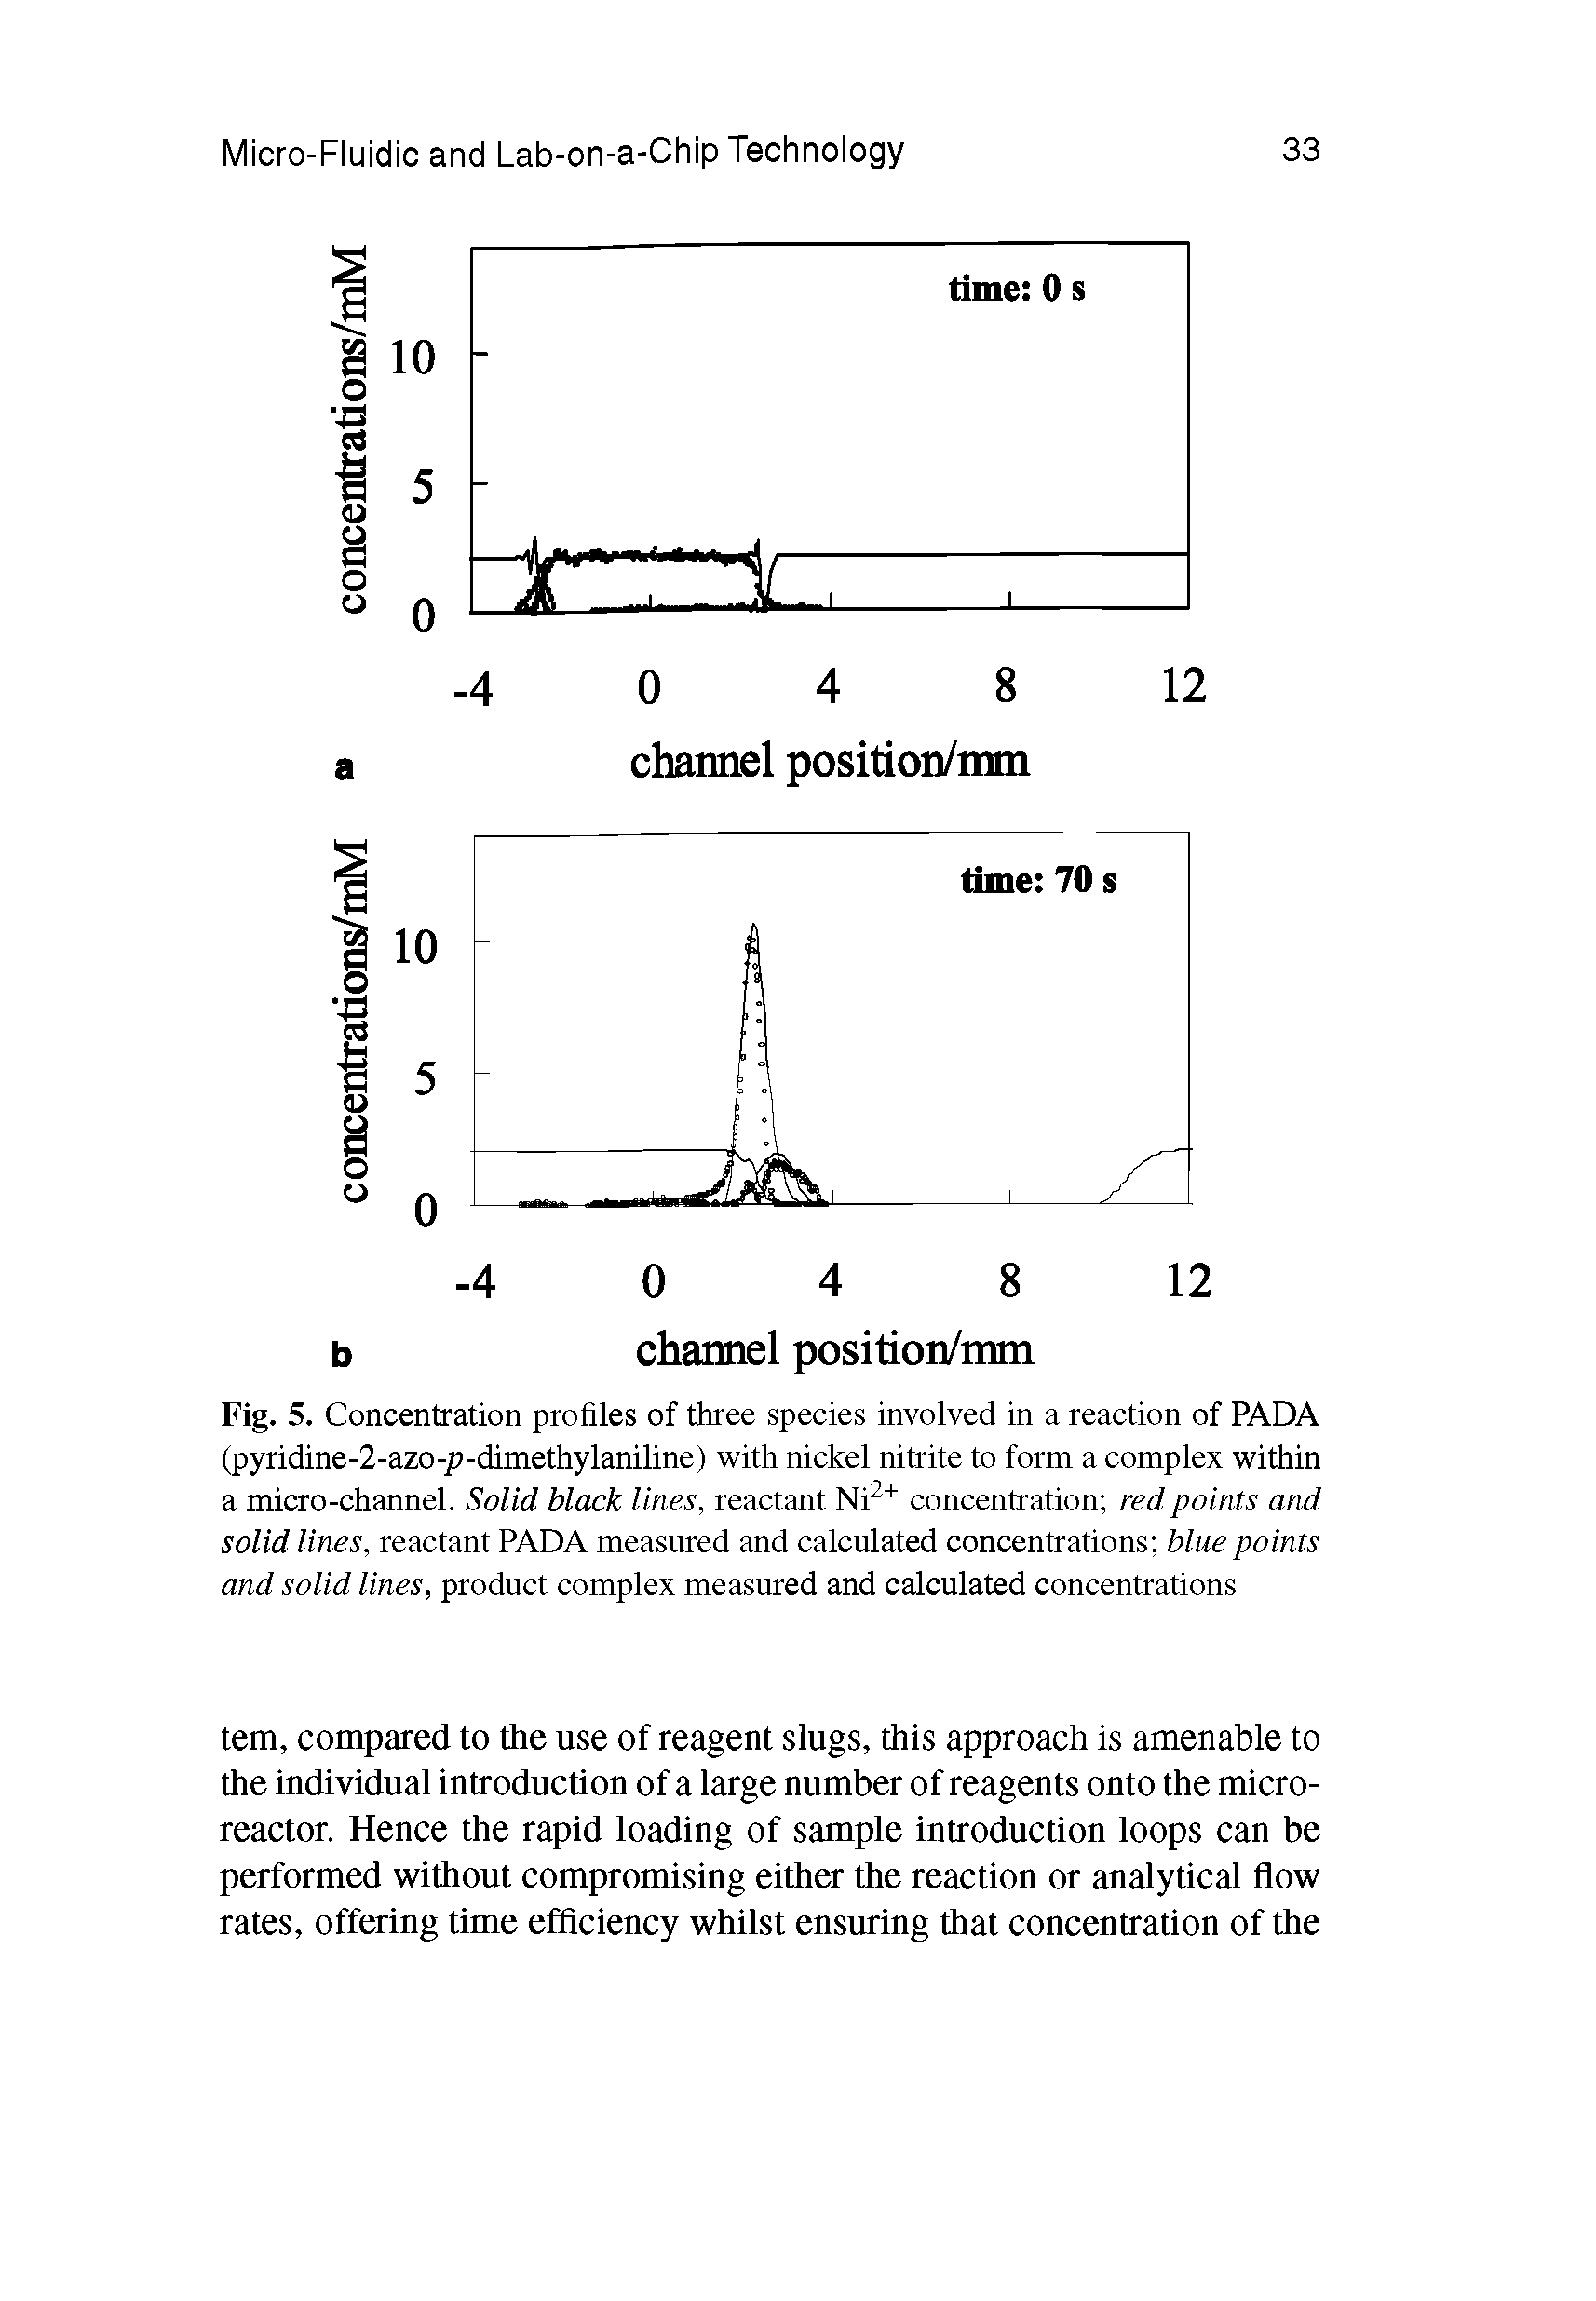 Fig. 5. Concentration profiles of three species involved in a reaction of PADA (pyridine-2-azo-p-dimethylaniline) with nickel nitrite to form a complex within a micro-channel. Solid black lines, reactant Ni2+ concentration red points and solid lines, reactant PADA measured and calculated concentrations blue points and solid lines, product complex measured and calculated concentrations...